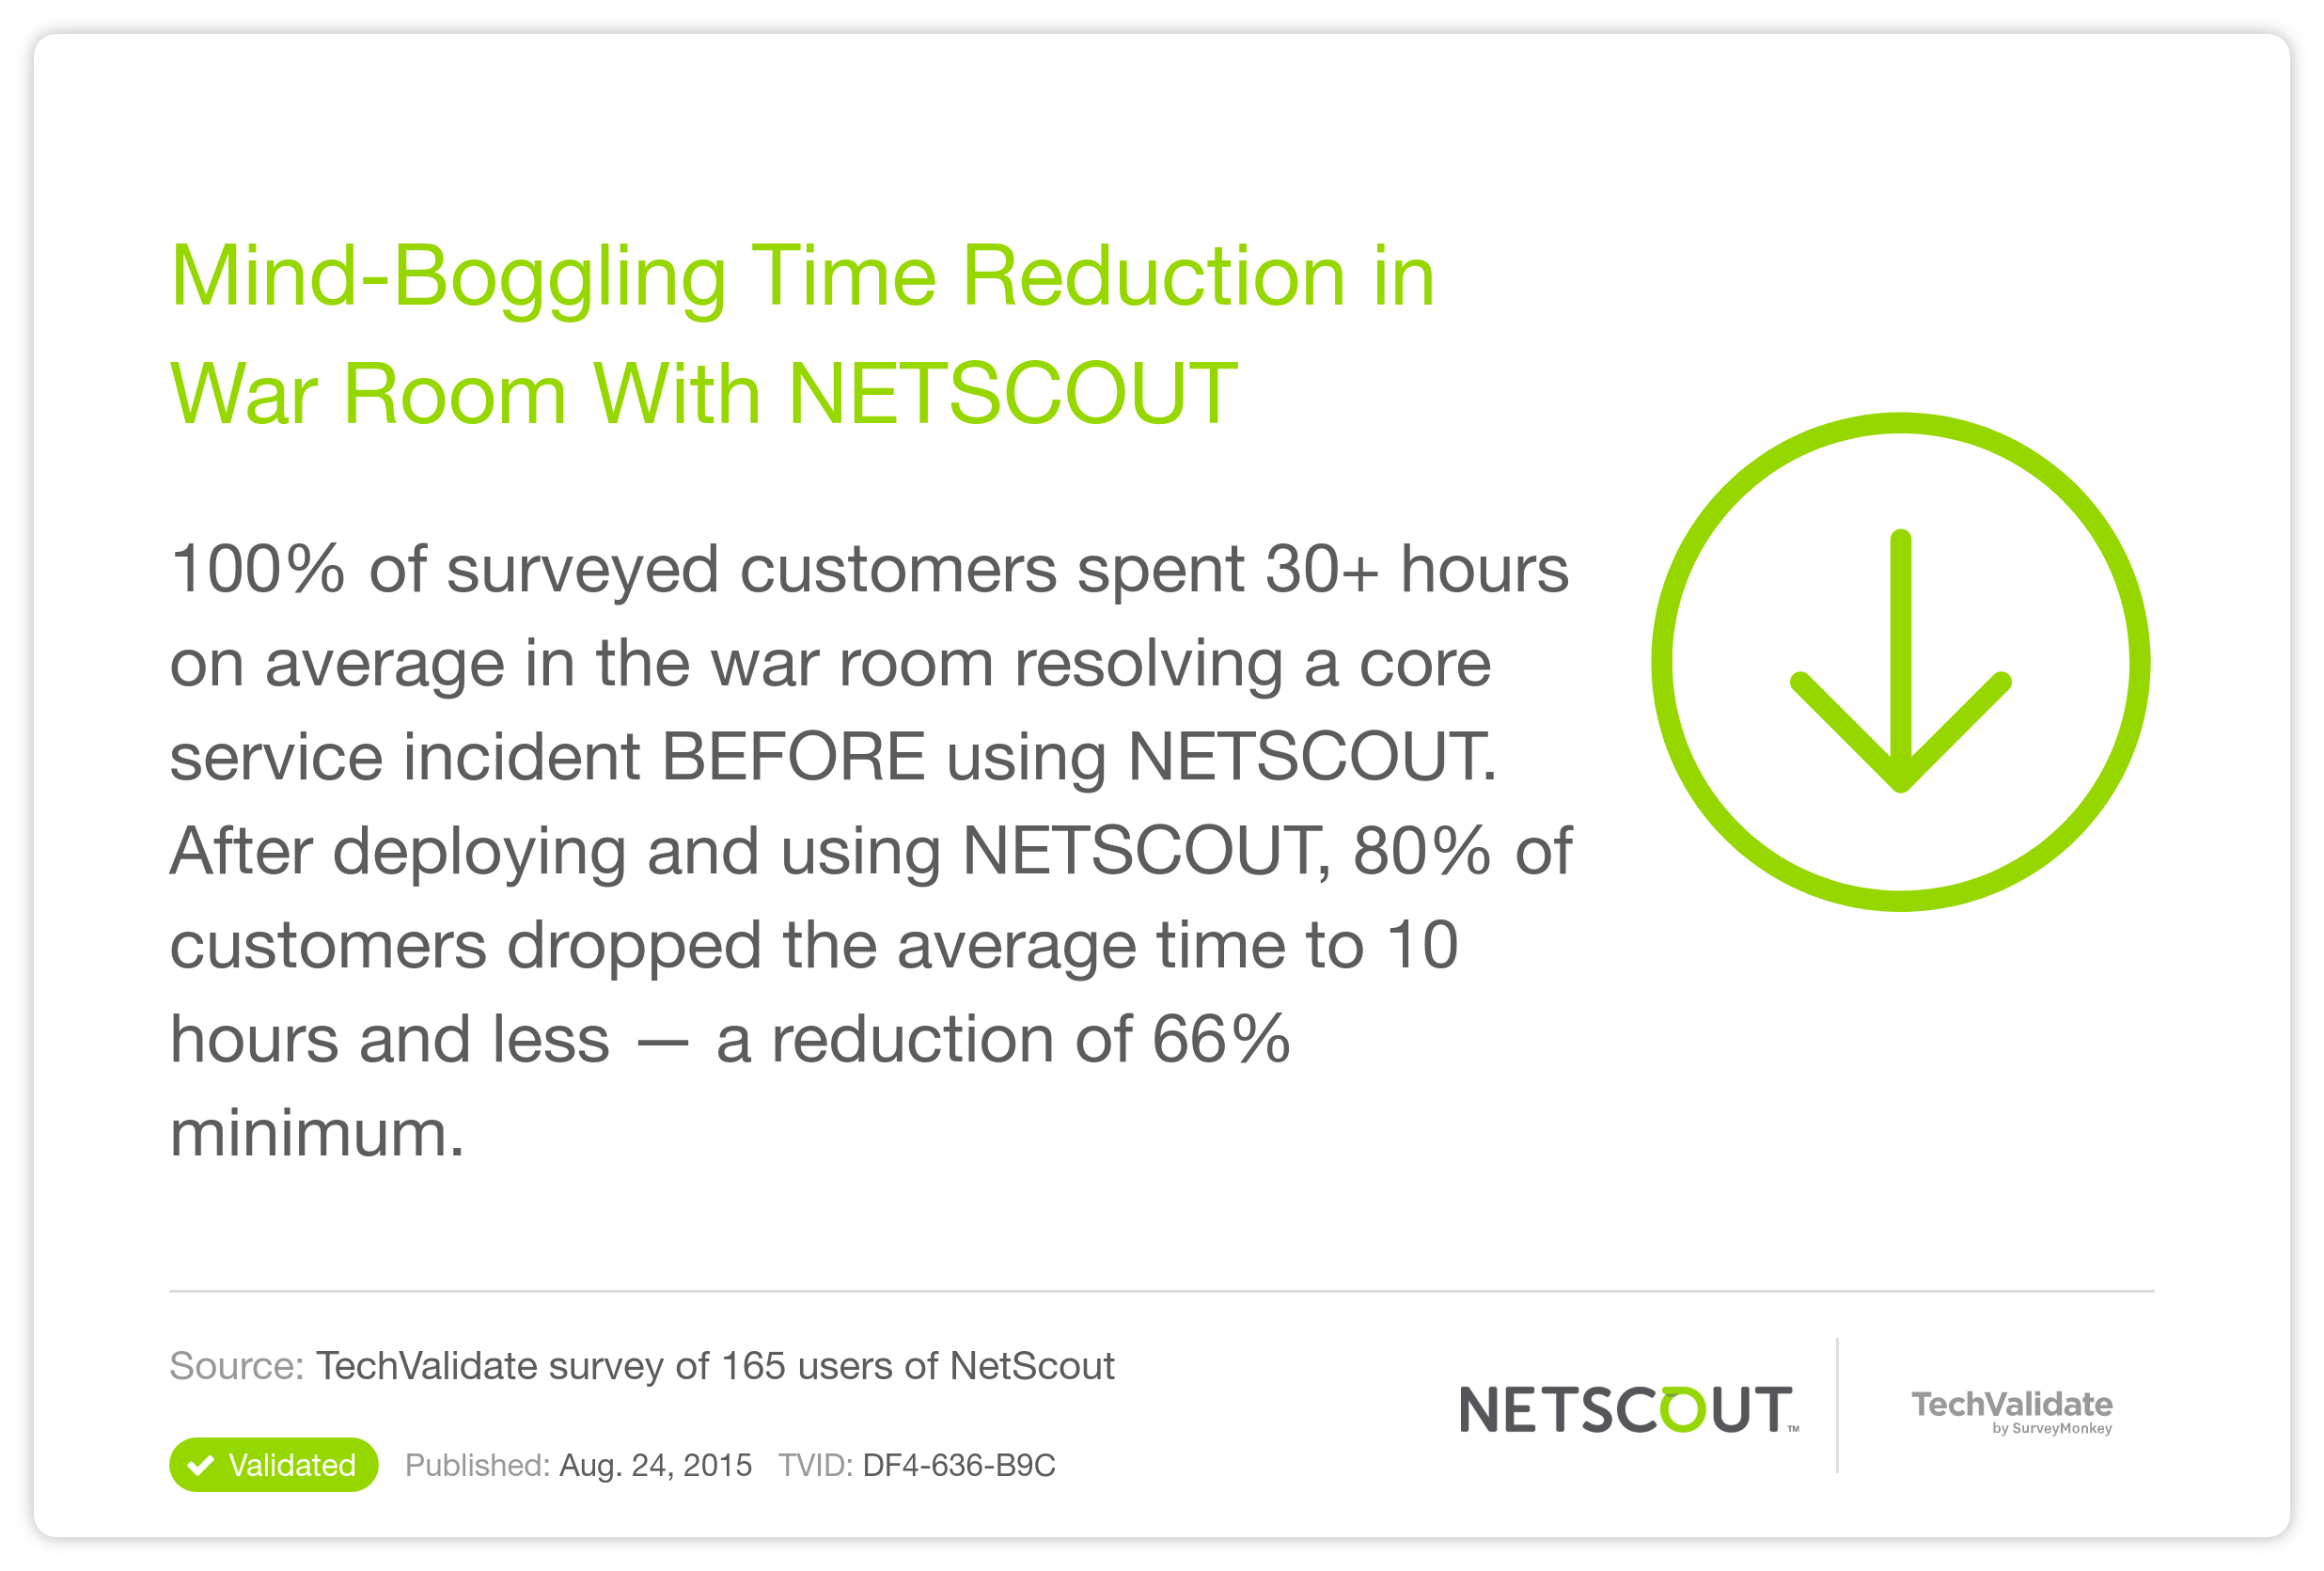 Mind-Boggling Time Reduction in War Room With NETSCOUT